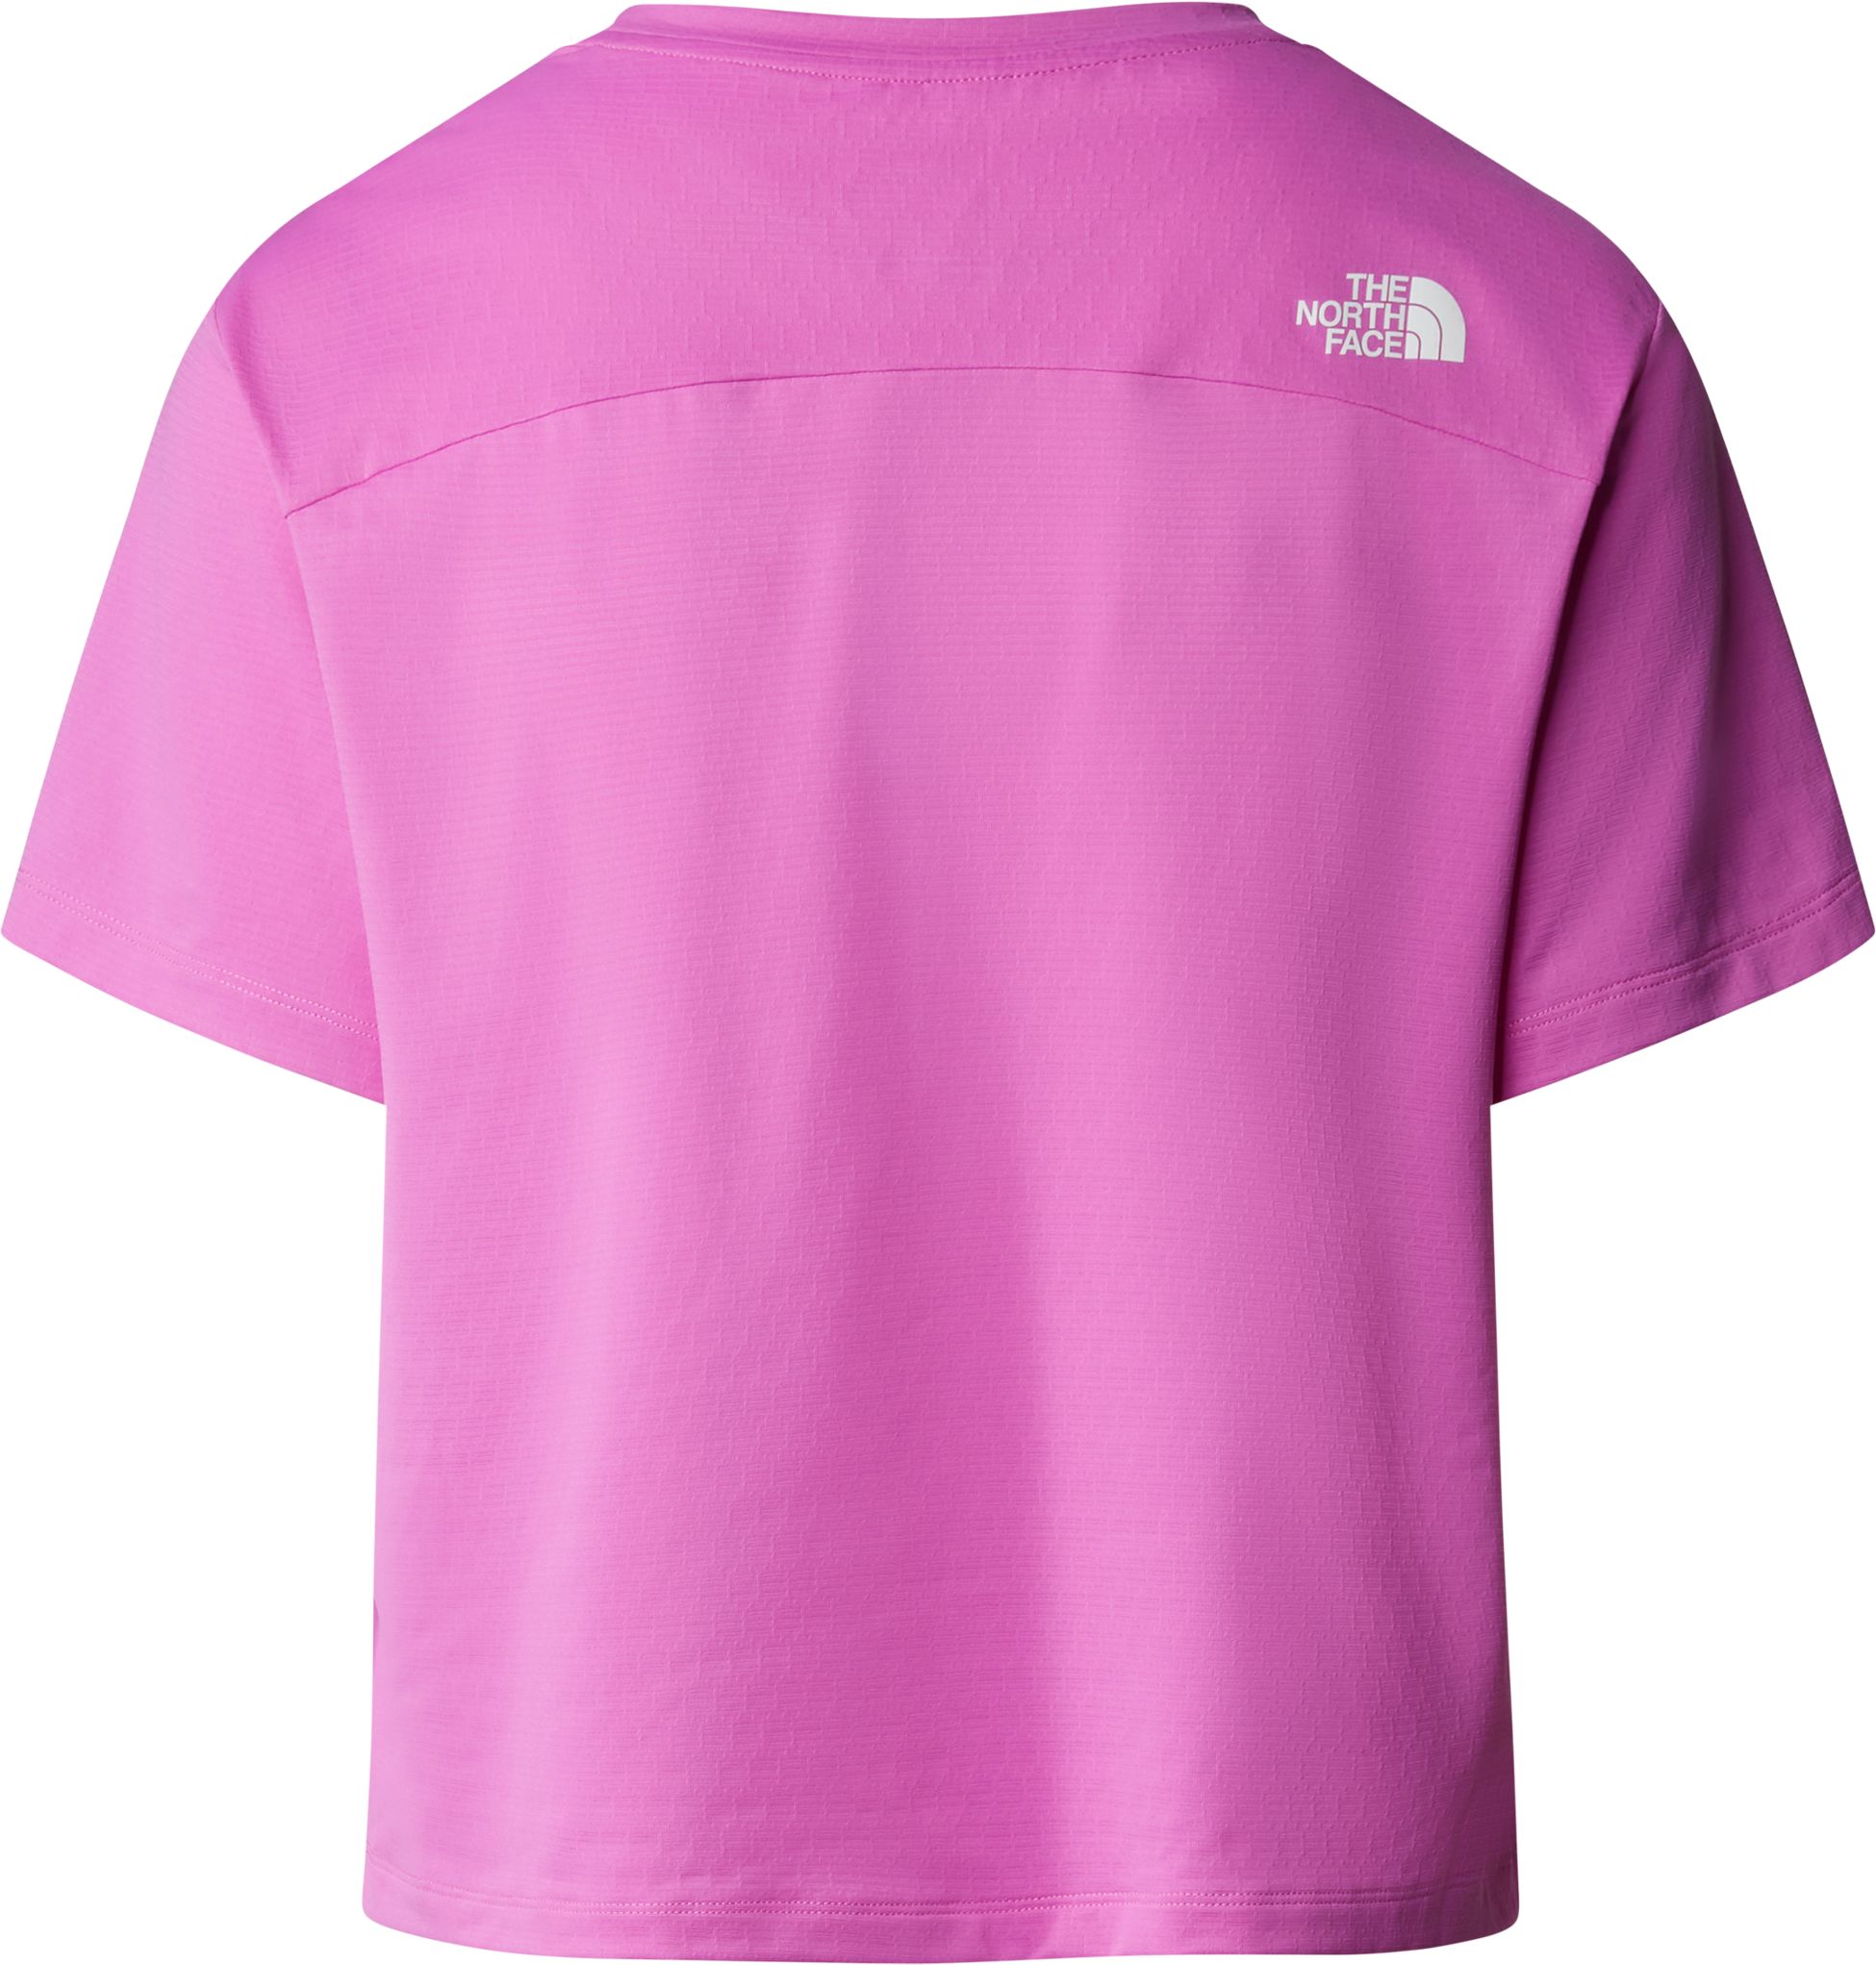 THE NORTH FACE, W FLEX CIRCUIT S/S TEE